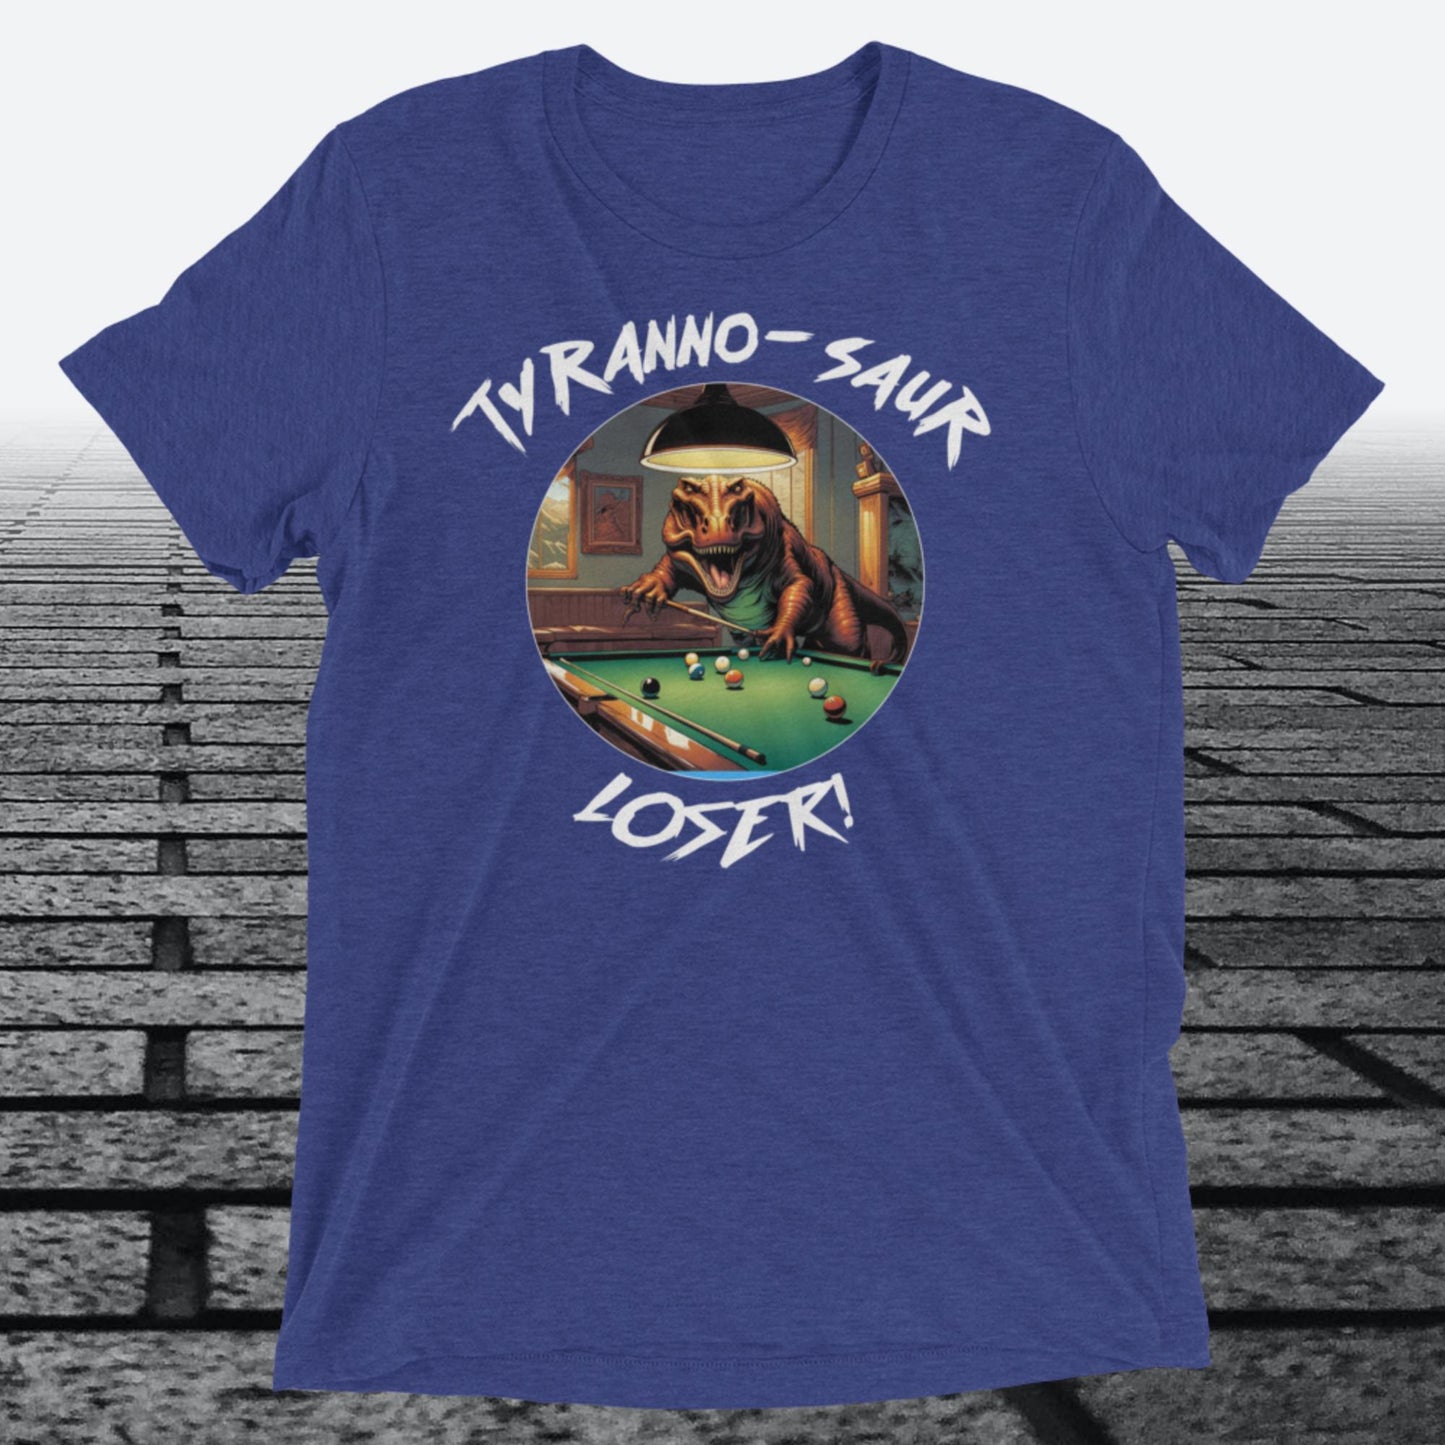 Tyranno-Saur Loser, on the front, Tri-blend t-shirt